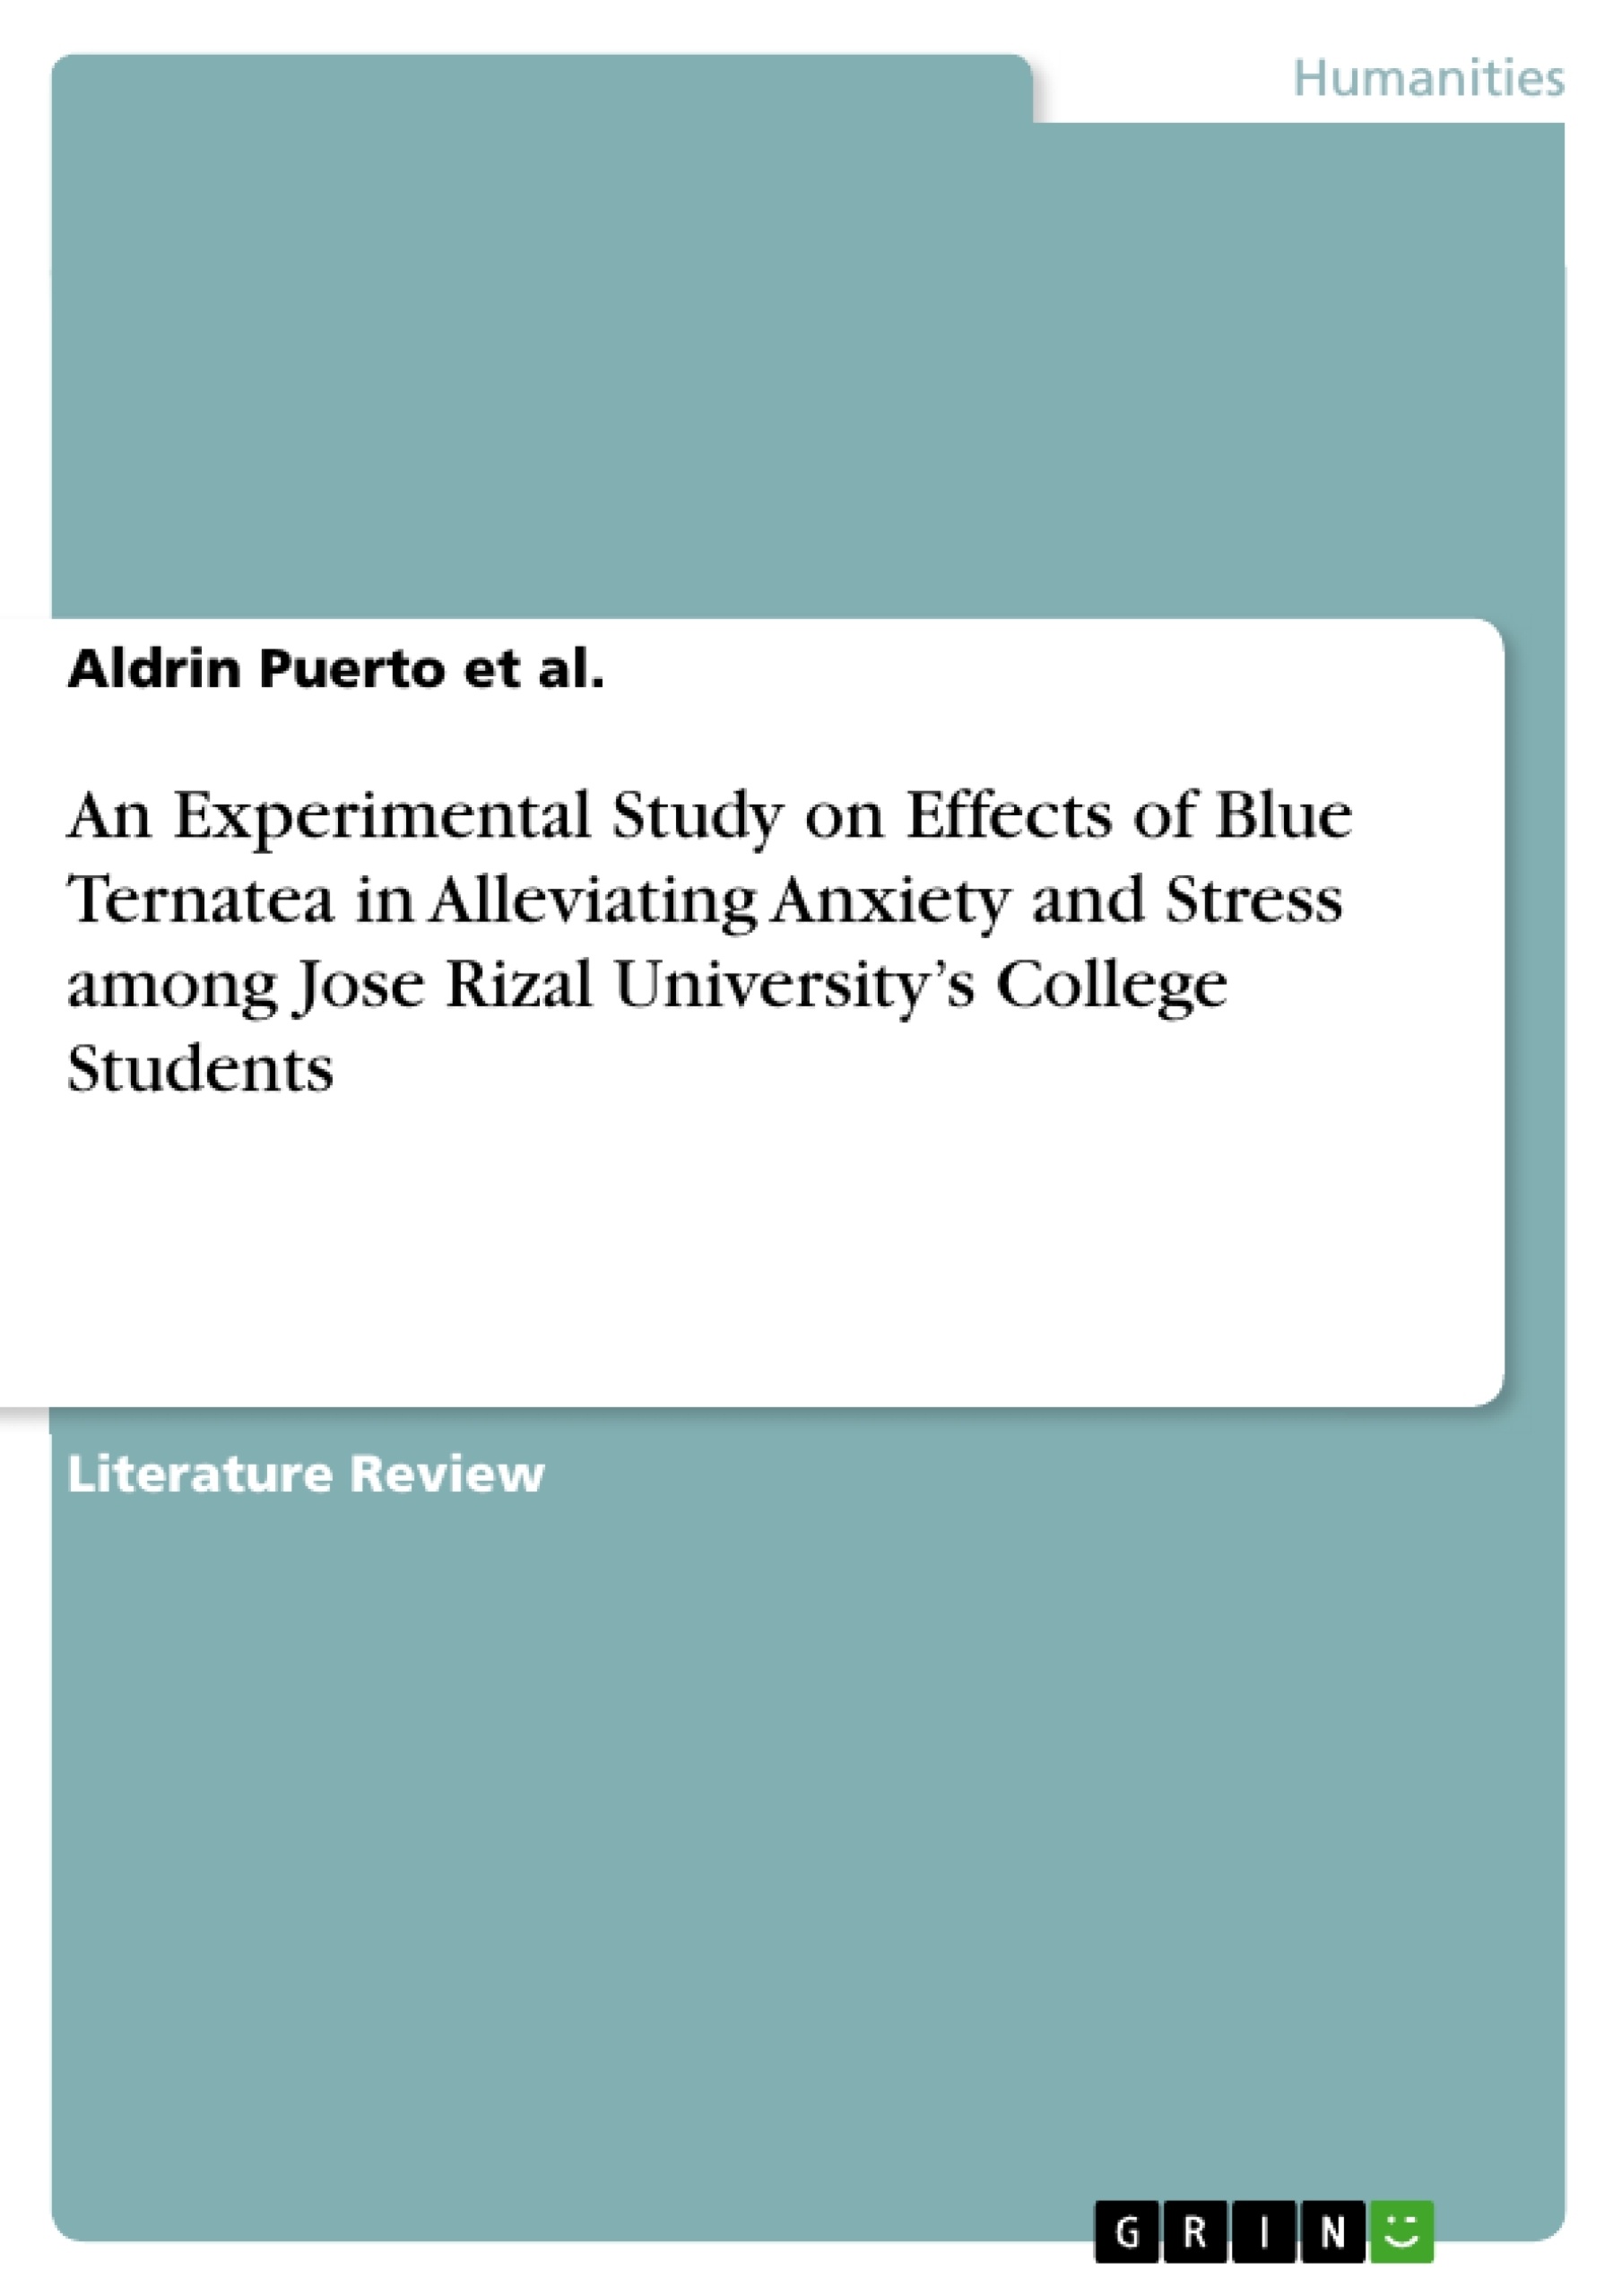 Title: An Experimental Study on Effects of Blue Ternatea in Alleviating Anxiety and Stress among Jose Rizal University’s College Students